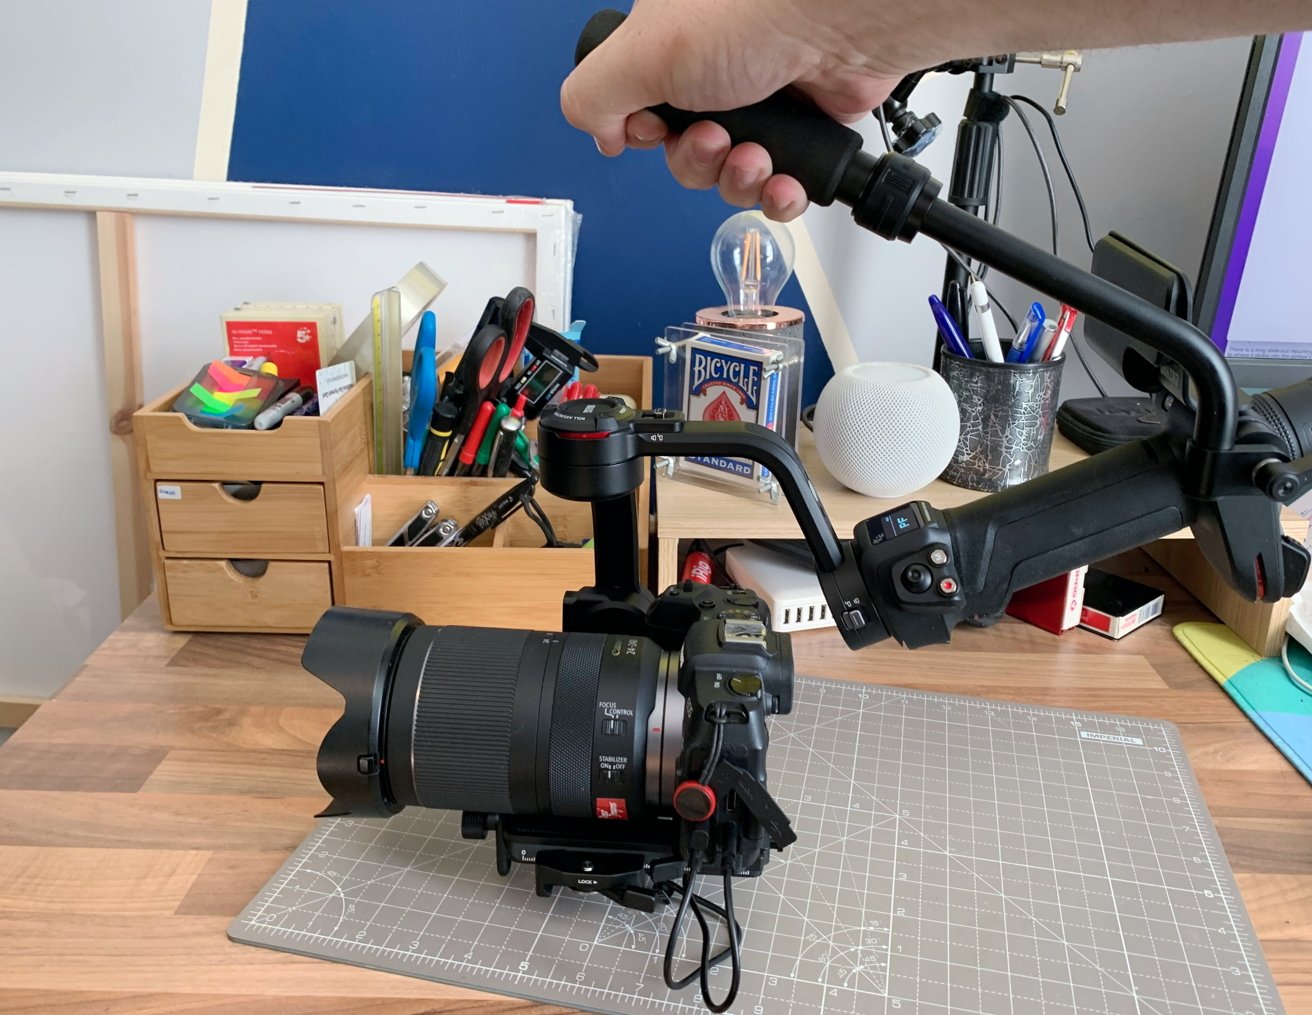 The Zhiyun Weebill 3 with Sling Grip in an underslung configuration